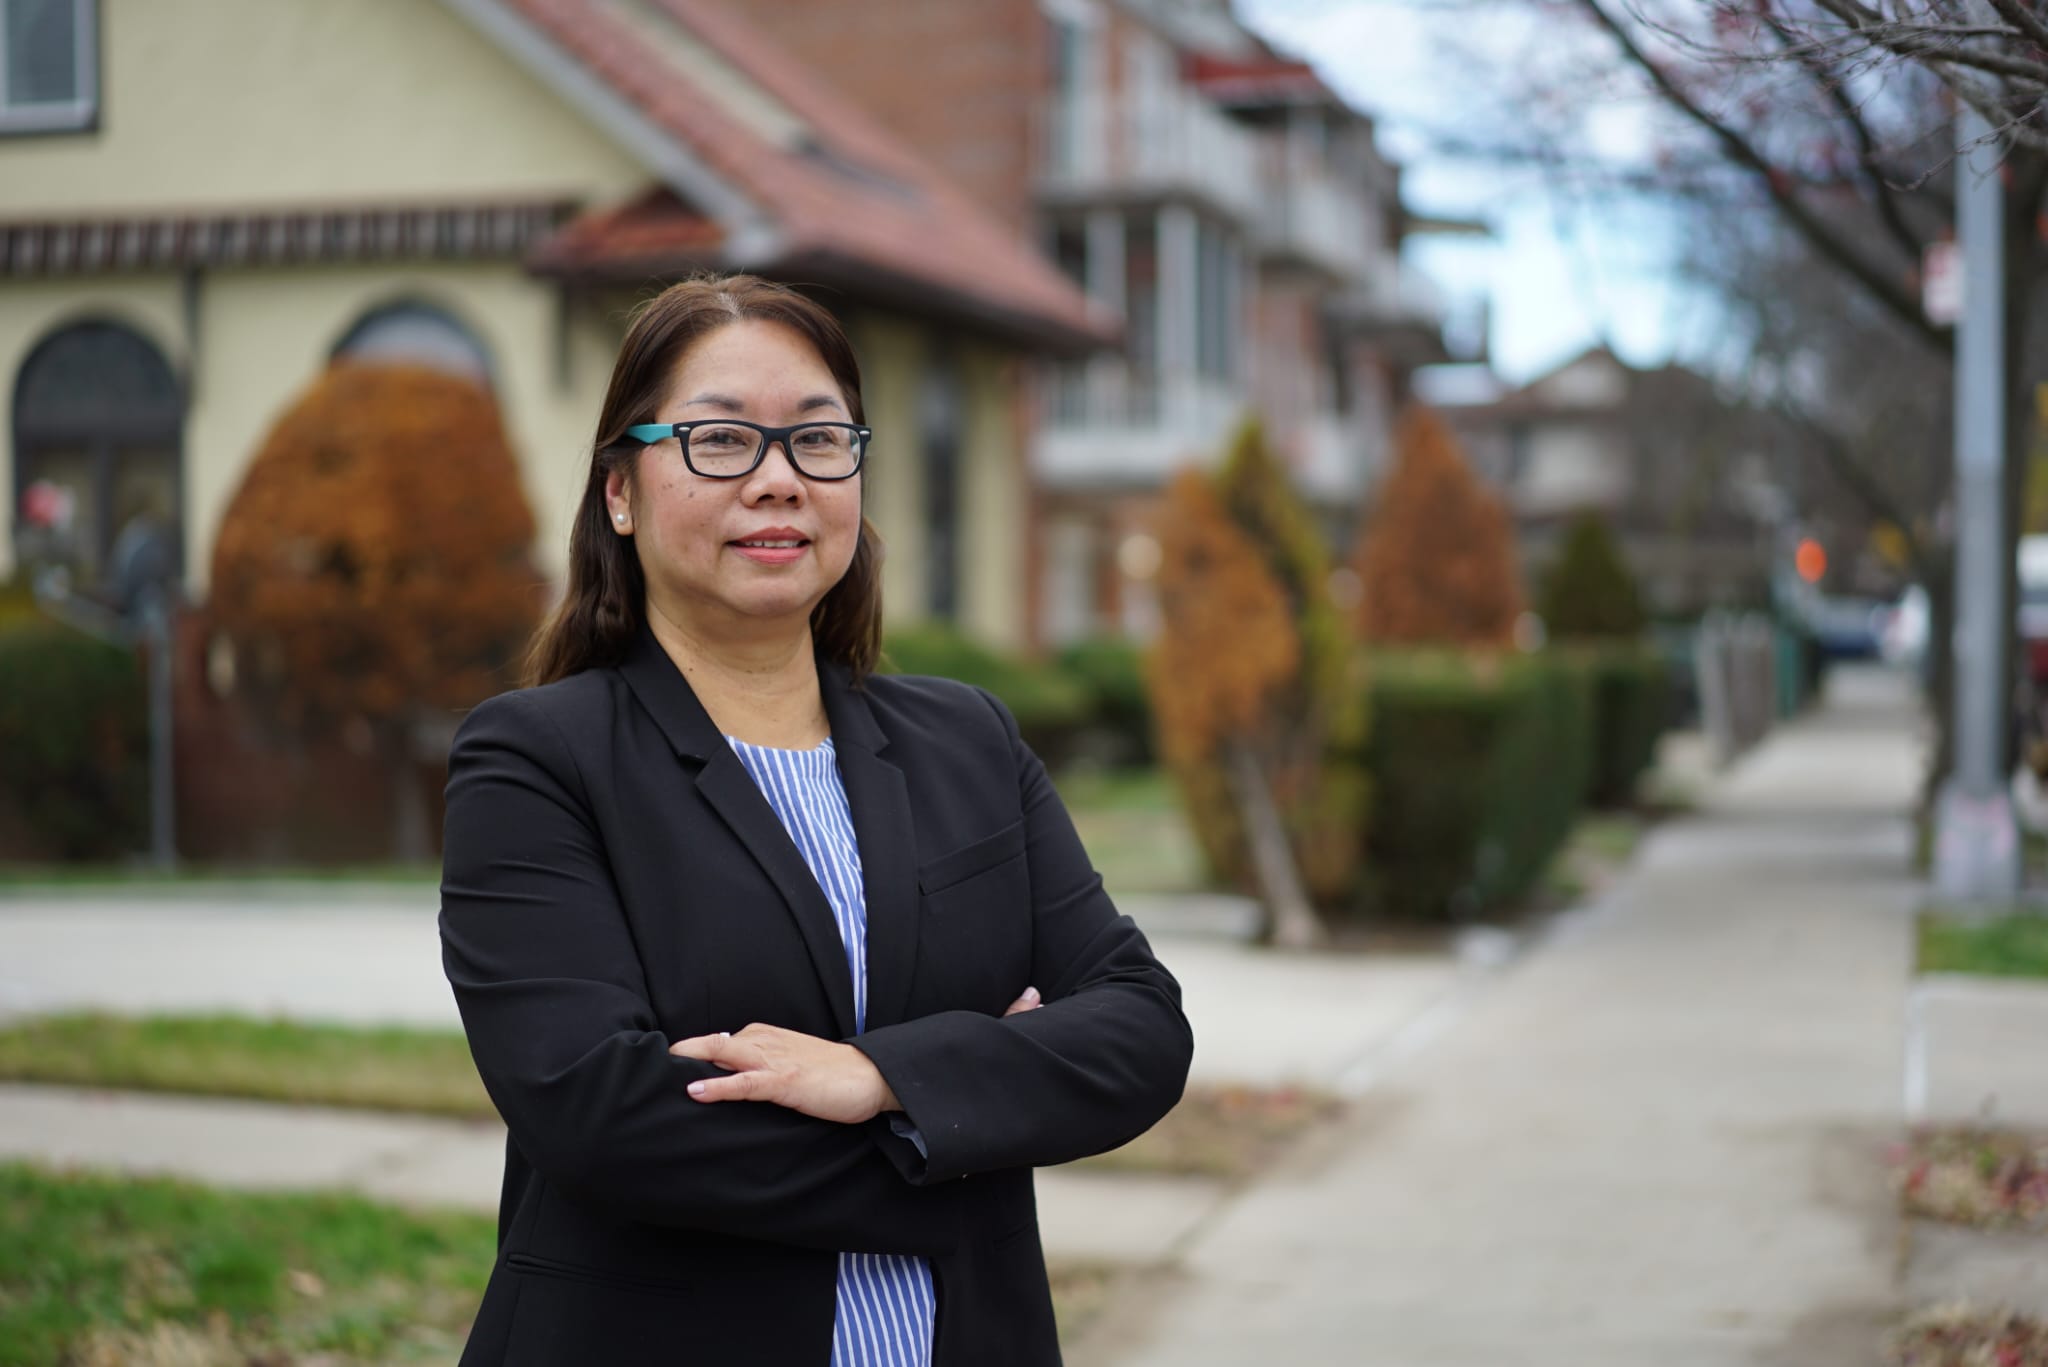 Wai Yee Chan, the candidate for democratic nomination in NY city council district 43, endorsed by the United Federation of Teachers